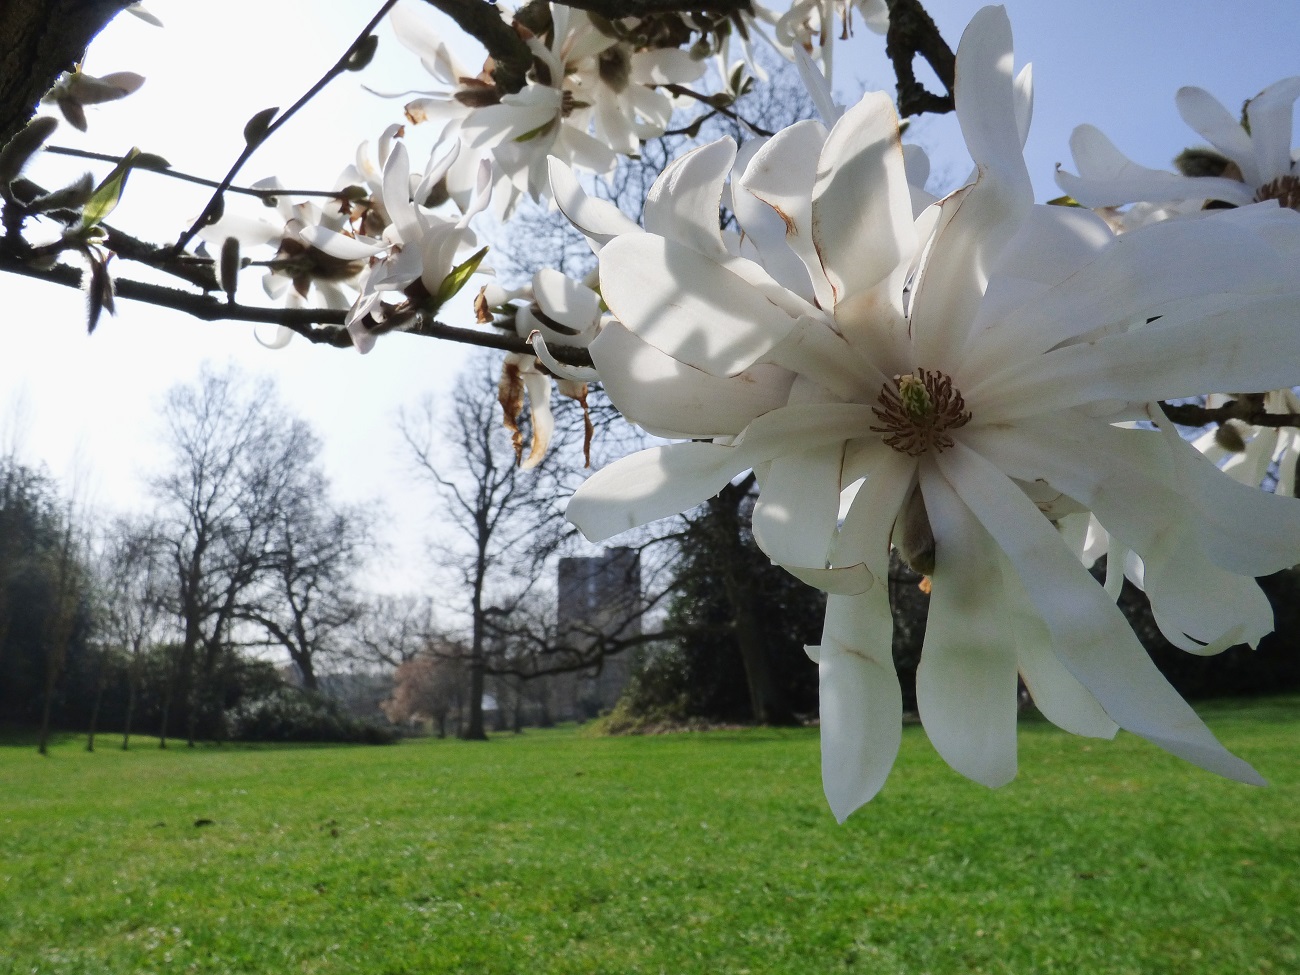 20170327_Bromley_Crystal-Palace-Park_Bloomed-over